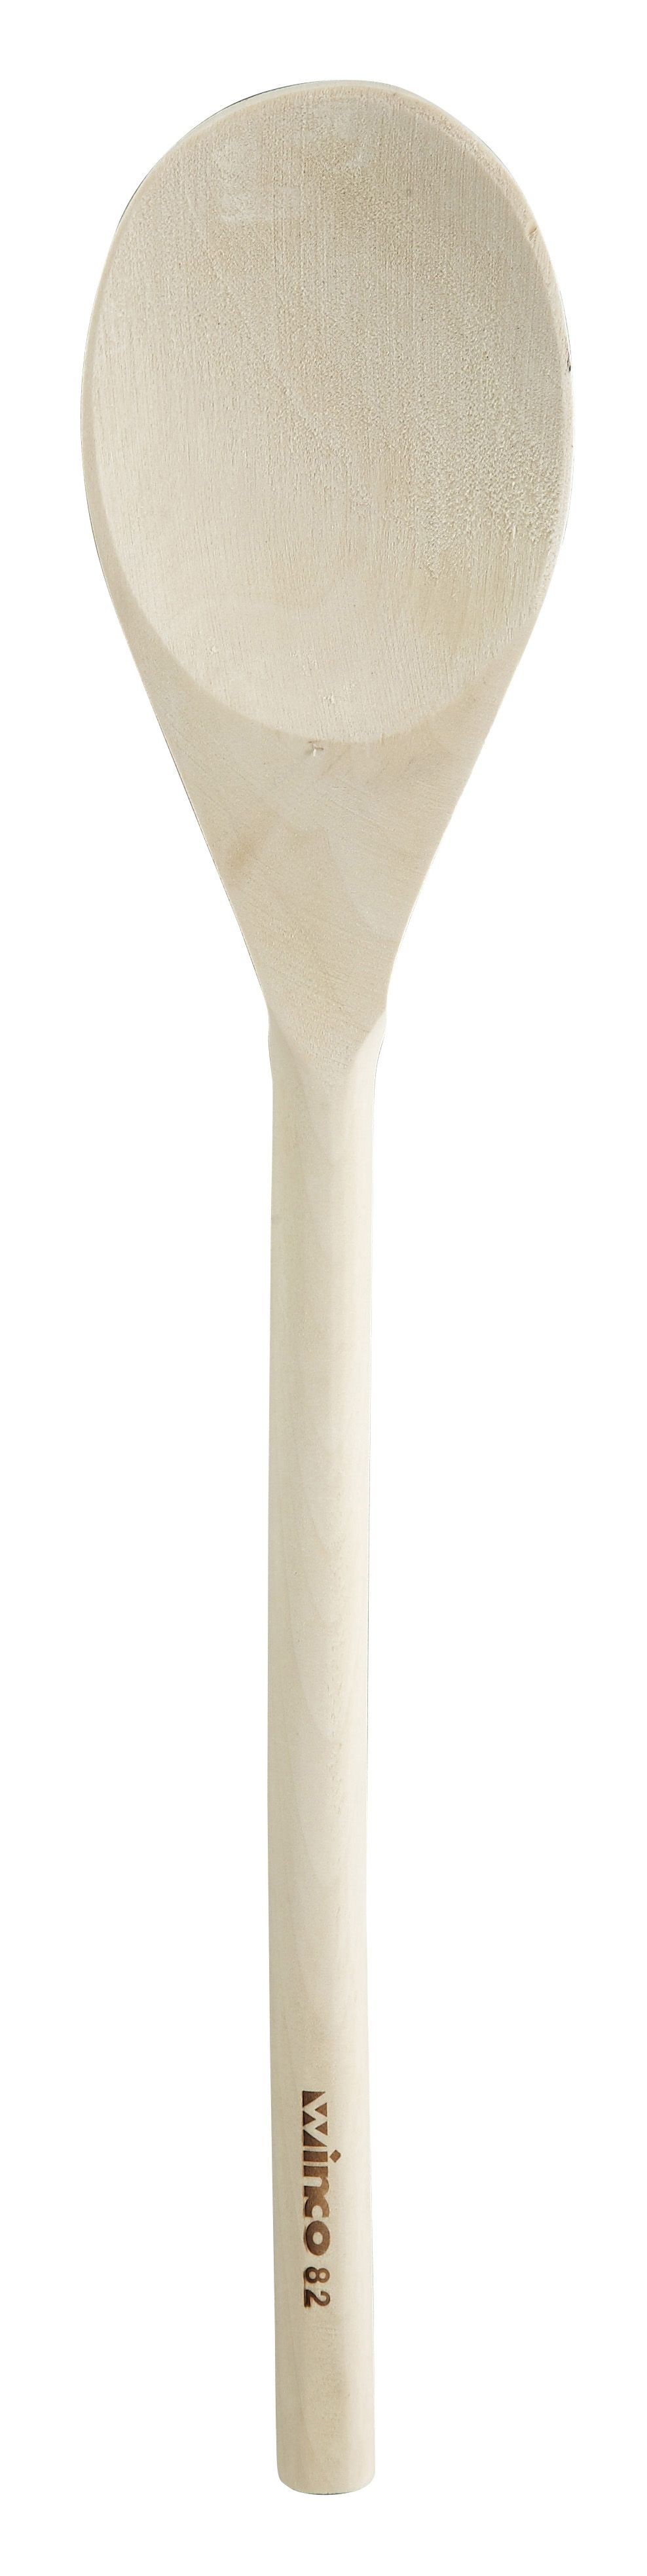 Winco WWP-14 Natural Finish Wooden Spoon 14"